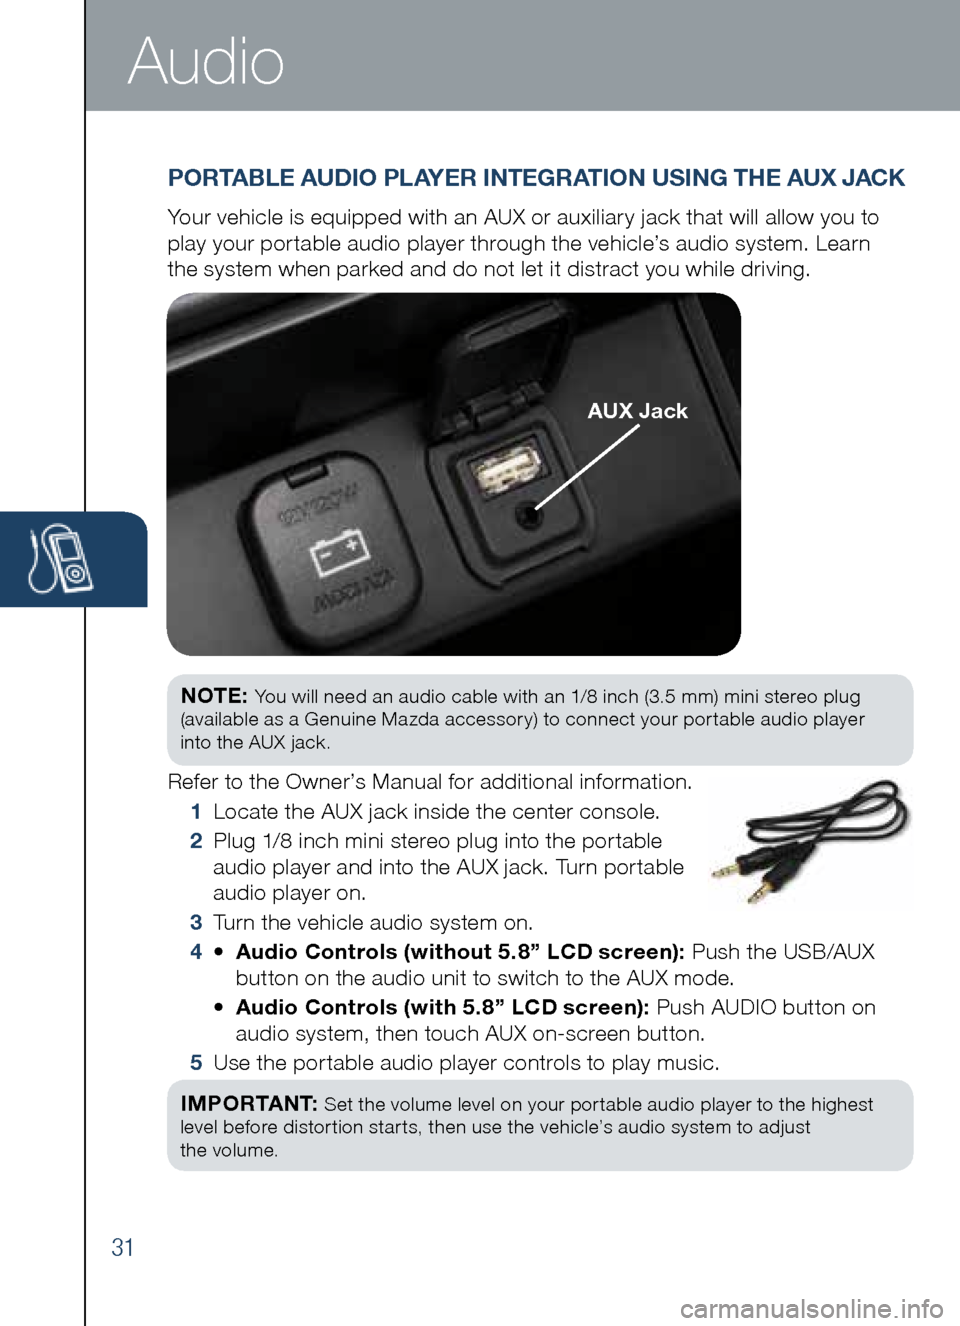 MAZDA MODEL CX-5 2014  Smart Start Guide (in English) 31
Audio
NOTE:	You	will	need	an	audio	cable	with	an	1/8	inch	(3.5	mm)	mini	stereo	plug 	
(available	as	a	Genuine	Mazda	accessory)	to	connect	your	portable	audio	player 		
into	the	AUX	jack.
Refer	to	t